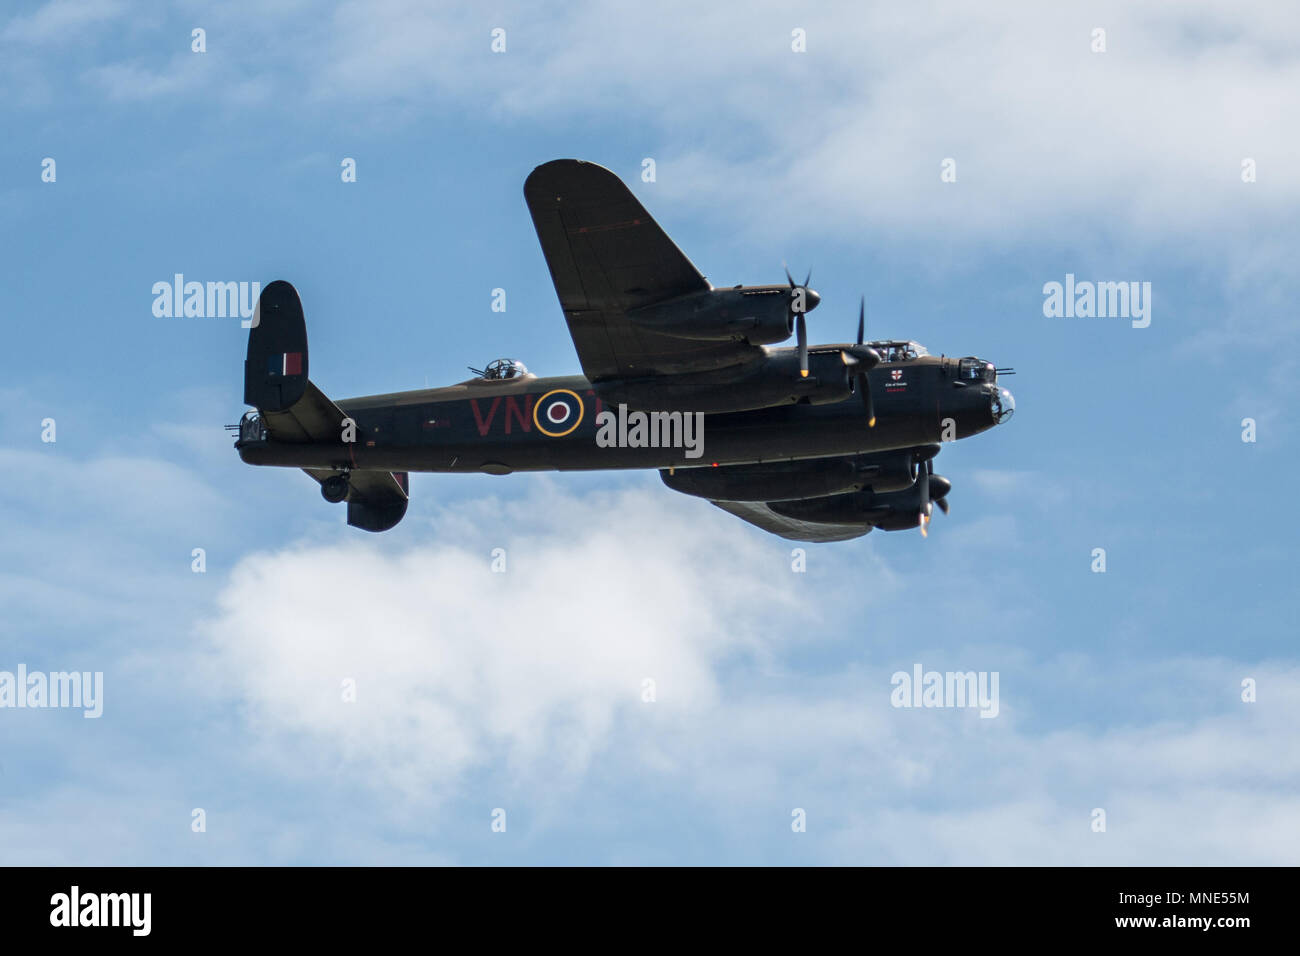 File Image:-RNAS Yeovilton, United Kingdom, 8th July 2017,   The Battle of Britain Memorial Flights Avro Lancaster PA 474 made her first public appearance at Yeovilton after her 9 months of Major Maintenance at Duxford where she has also received a new livery her port side is owns now adorned with the colours of 460 squadron Royal Australian Air Force  AR-L for Leader which flew from RAF Binbrook from 1943 until she was lost after being brought down by flack with the loss of her crew whilst attacking V-1 sites in France on the 3rd Auguat 1944, and a scheme representing an RAF Waddington based  Stock Photo